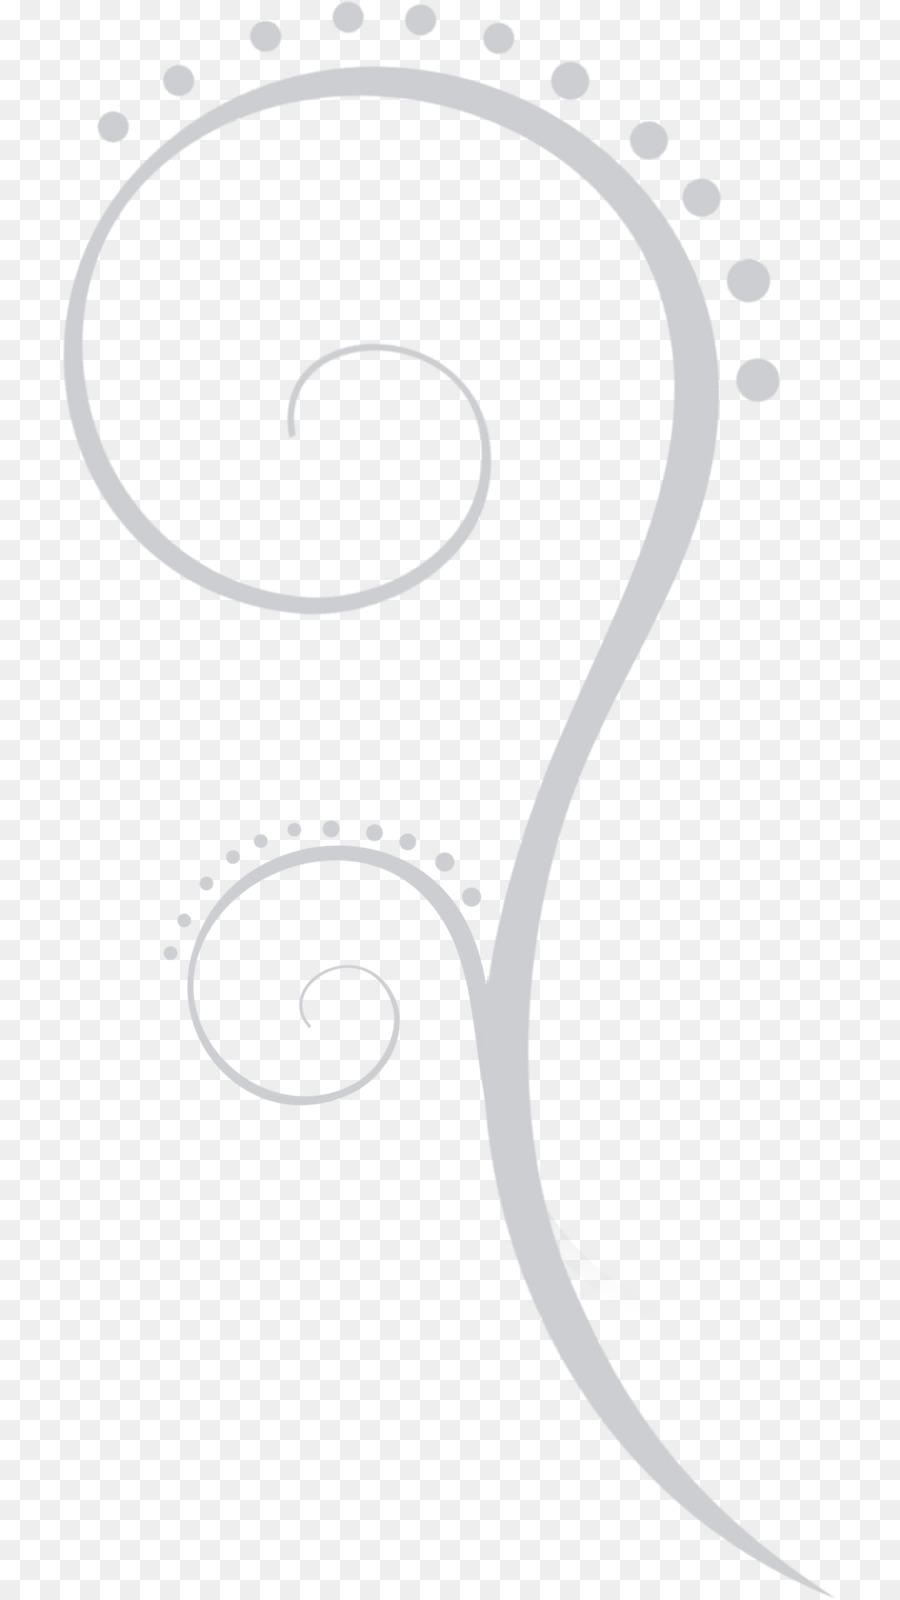 Black and white Clip art - swirls png download - 775*1600 - Free Transparent Black And White png Download.